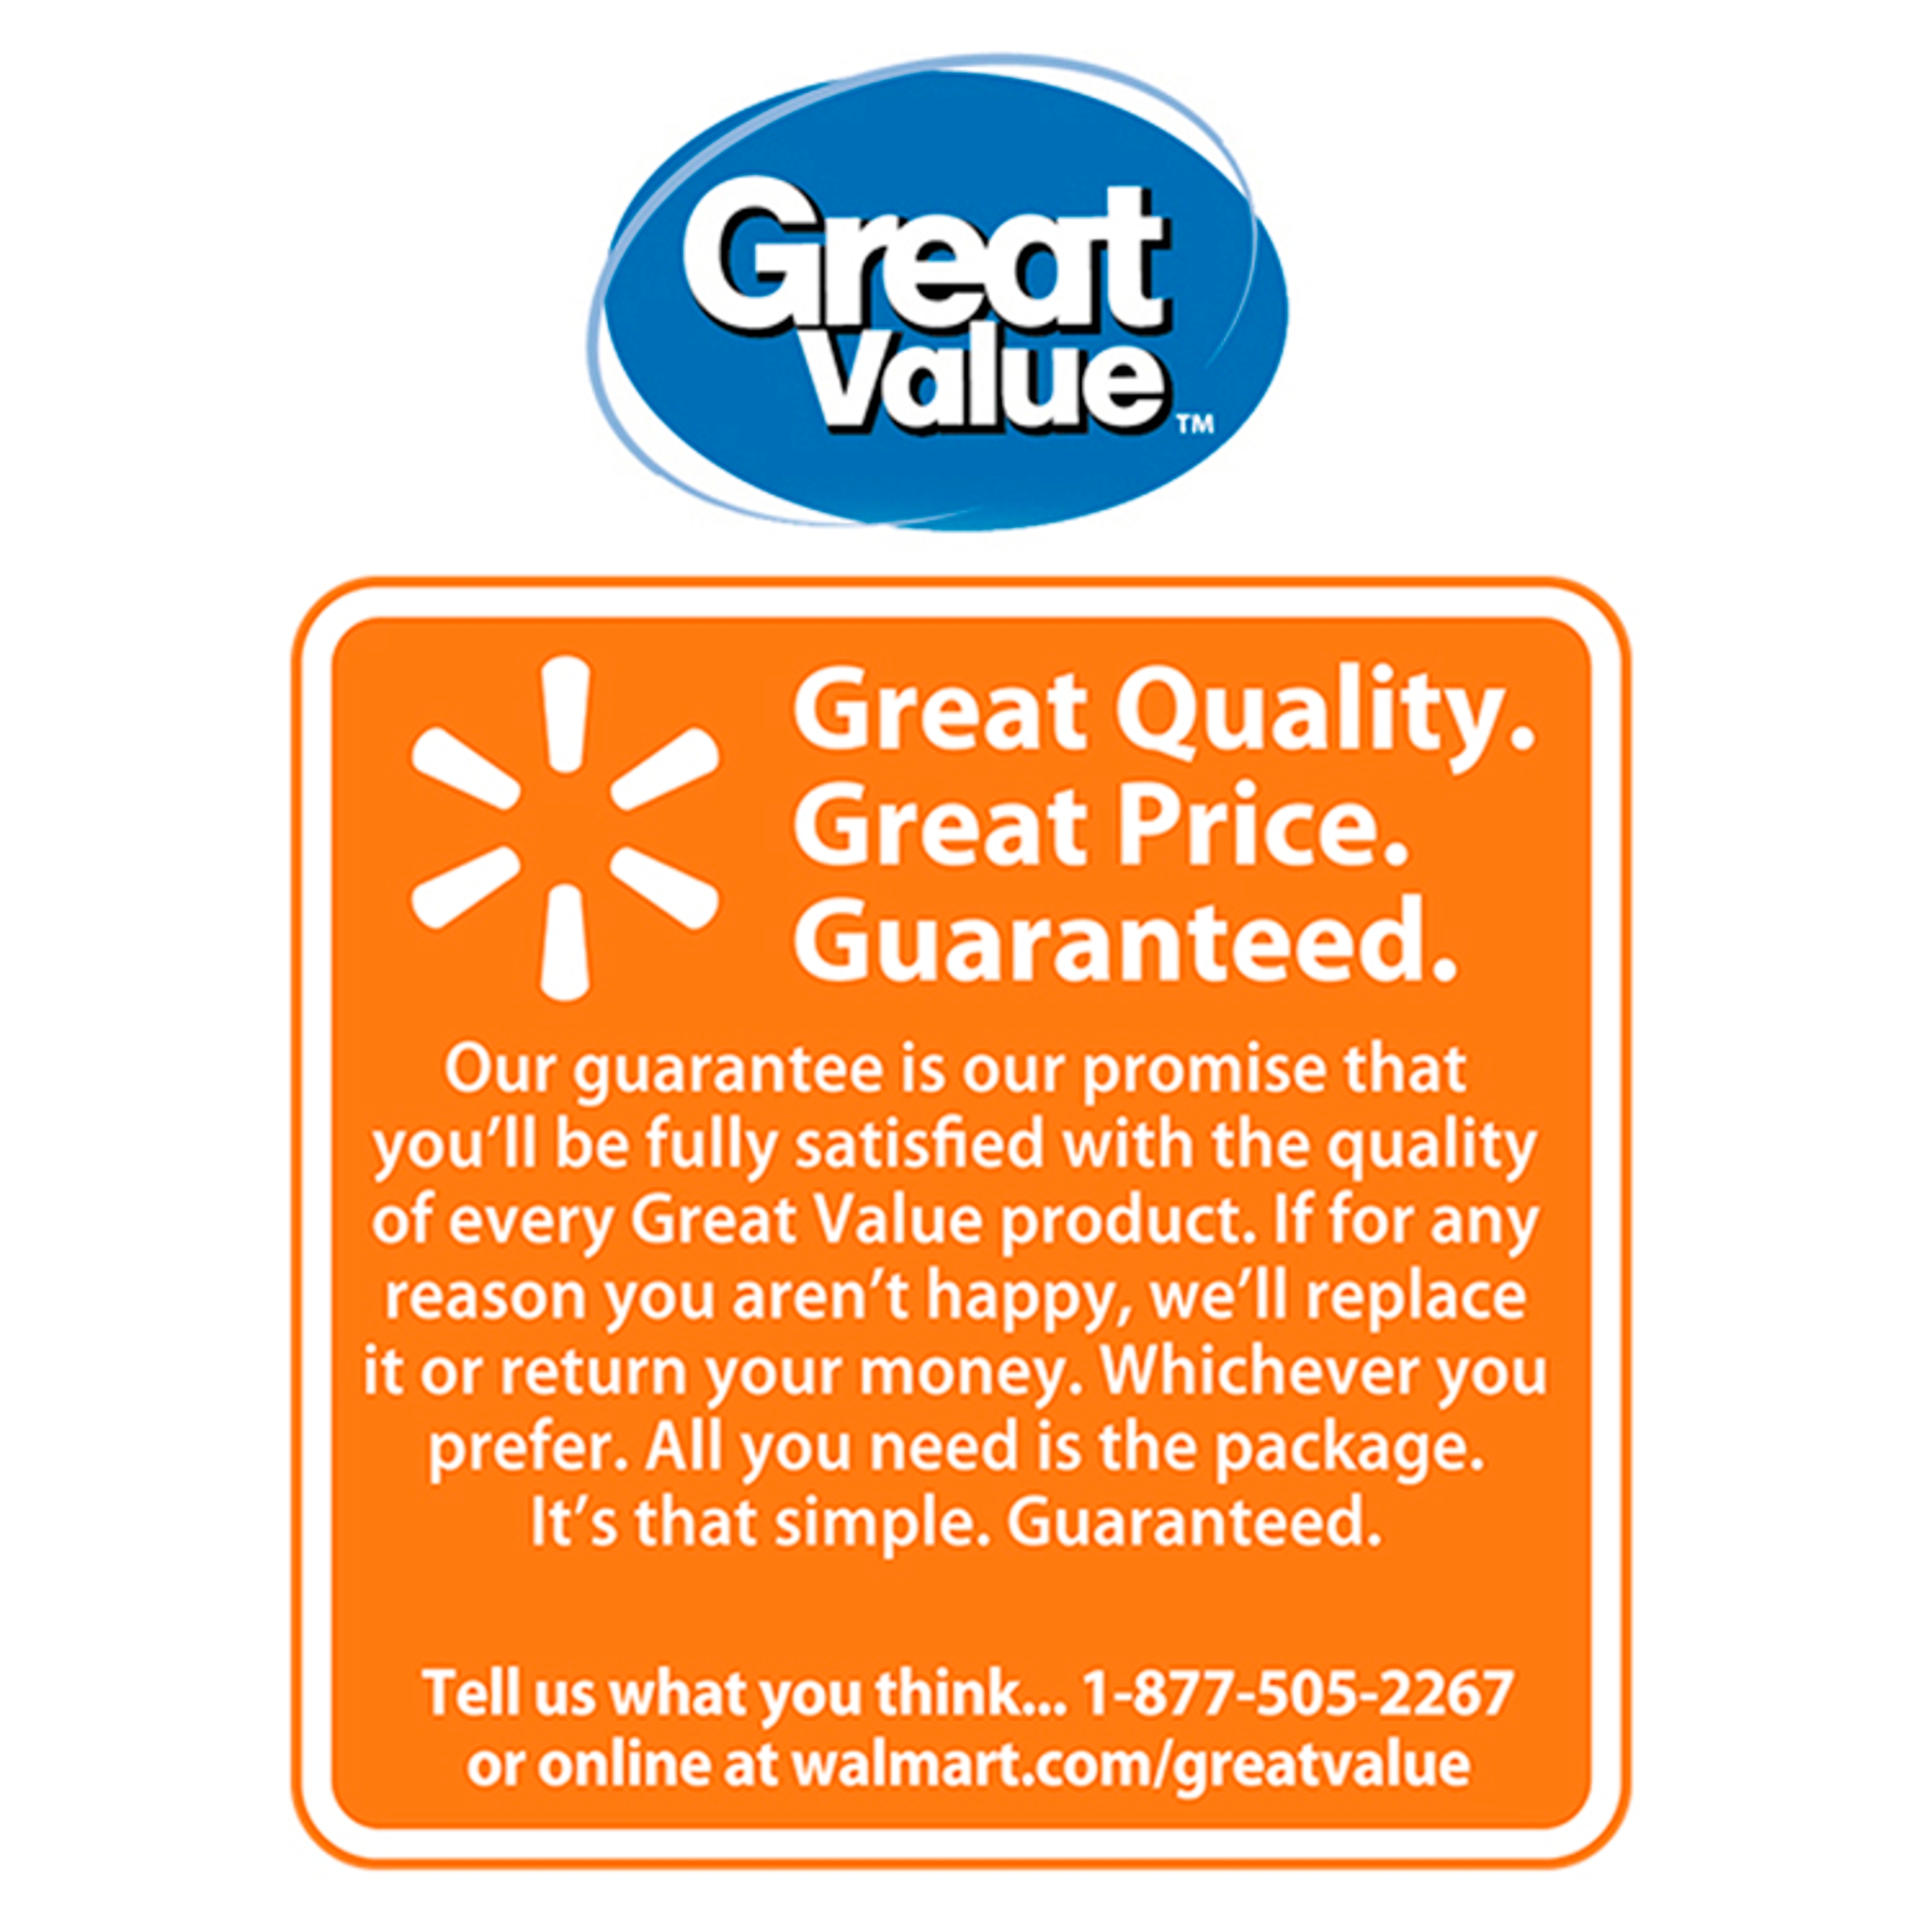 Great Value Take Outs 32 fl oz Storage Container, 4 count - image 5 of 9